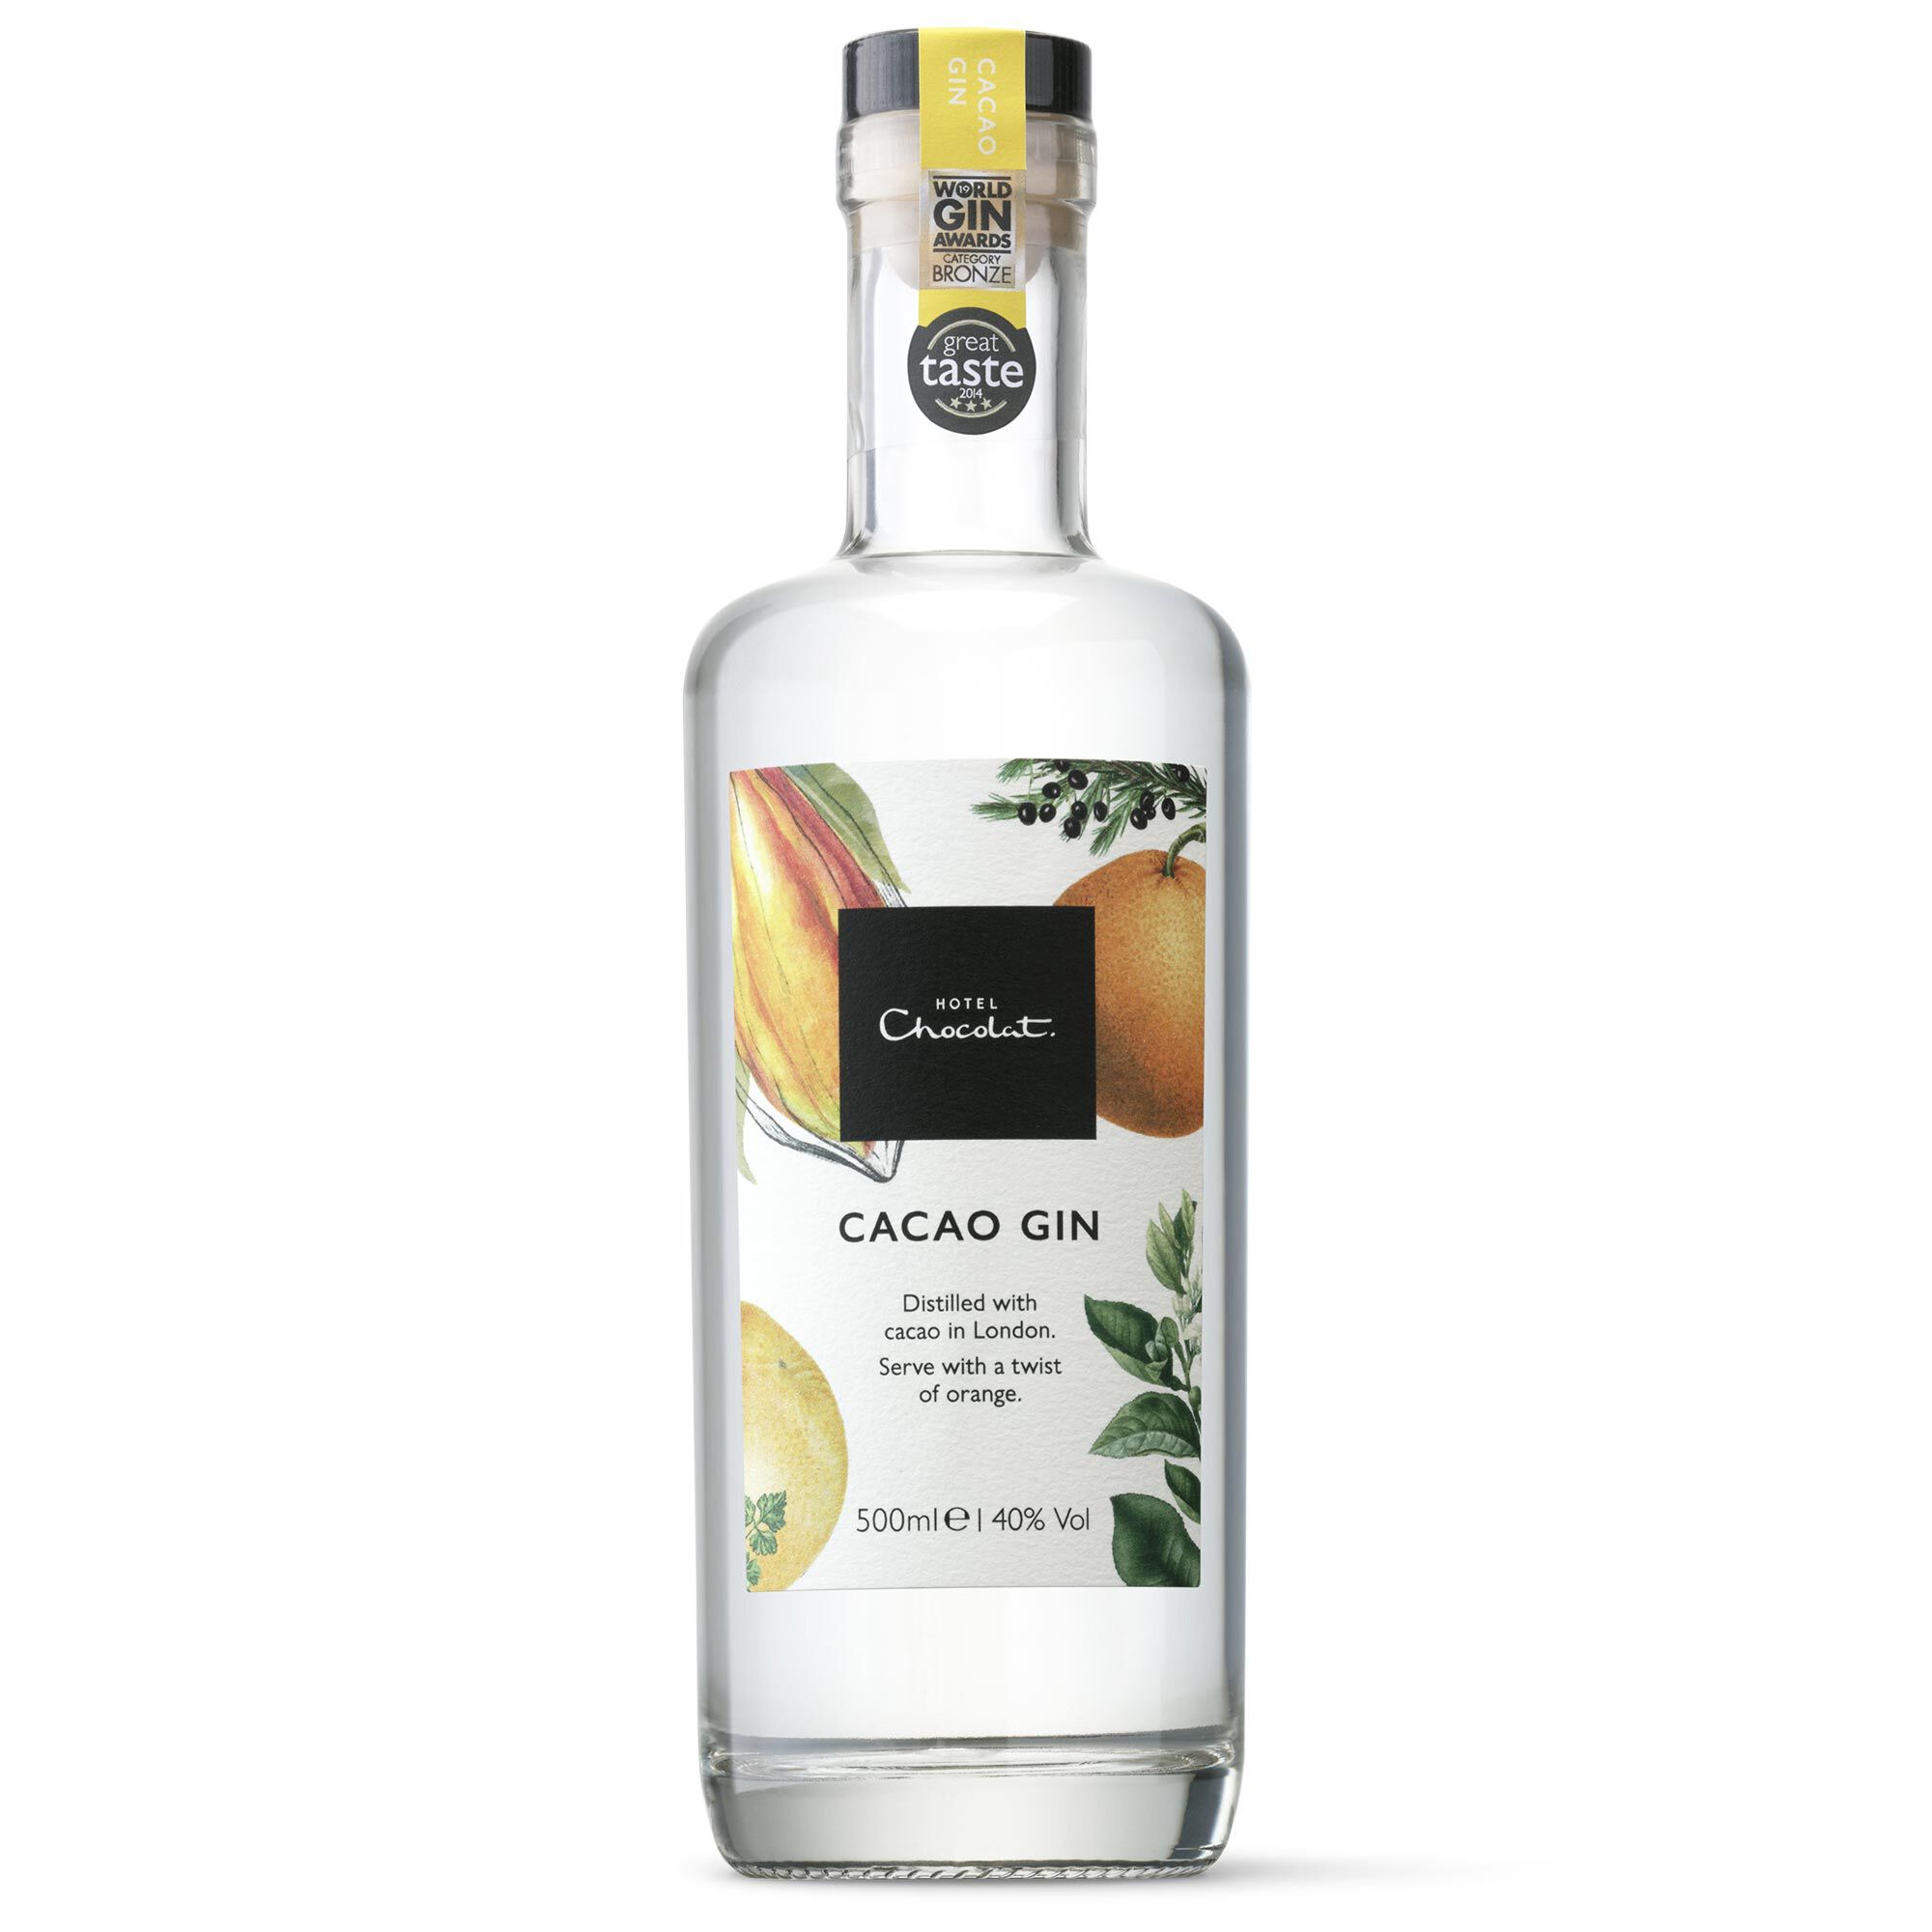 Cacao Gin 500ml | Gin Delivery | Hotel Chocolat